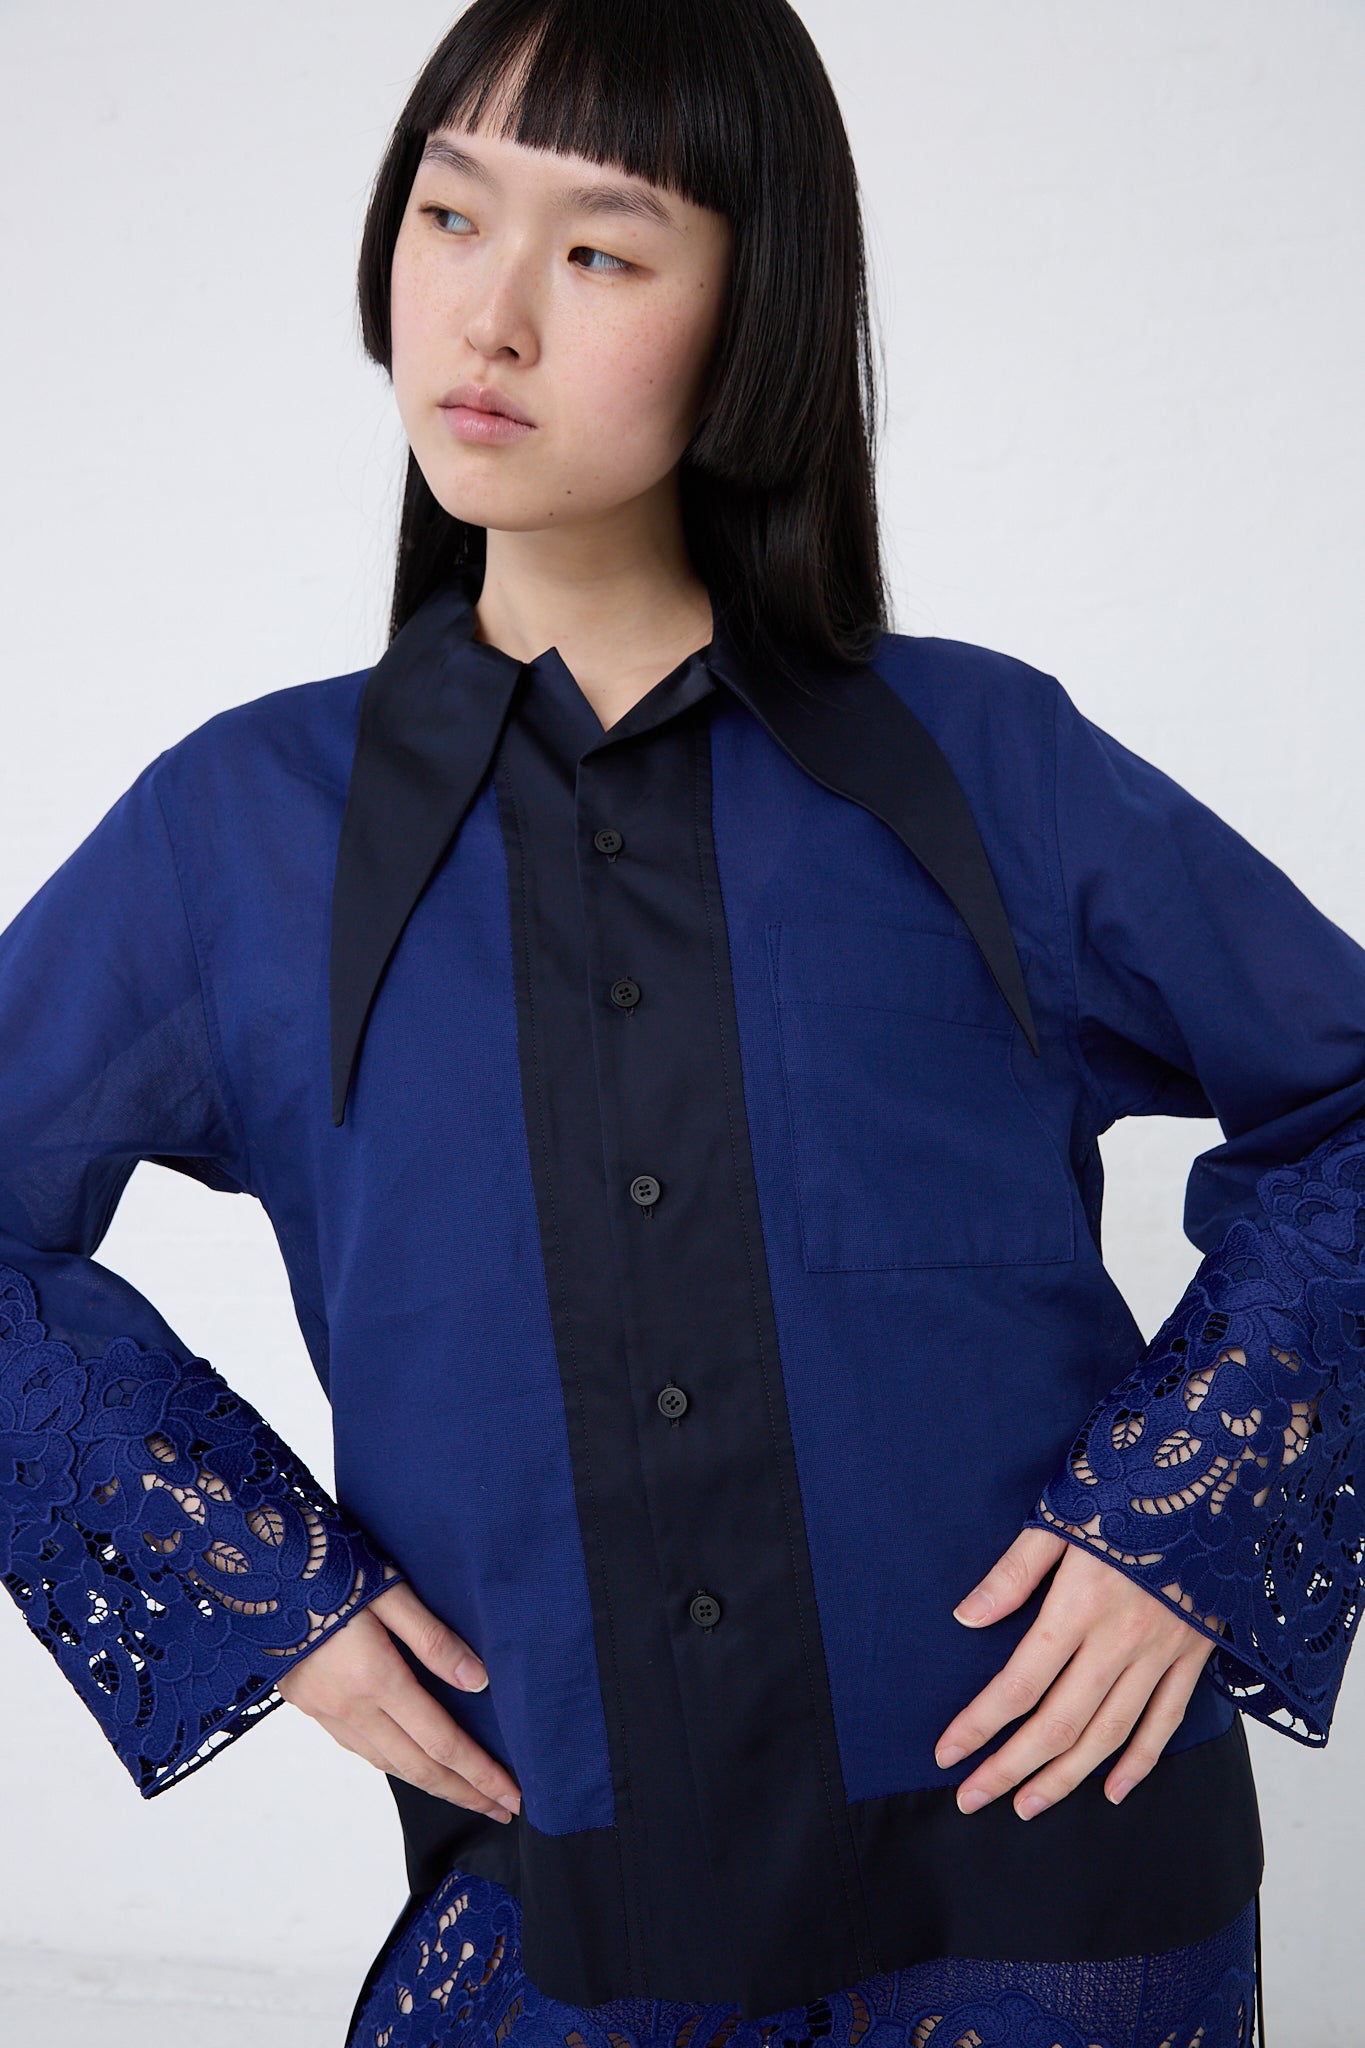 The model is wearing a TOGA PULLA Mesh Lace Shirt in Blue with lace sleeves.